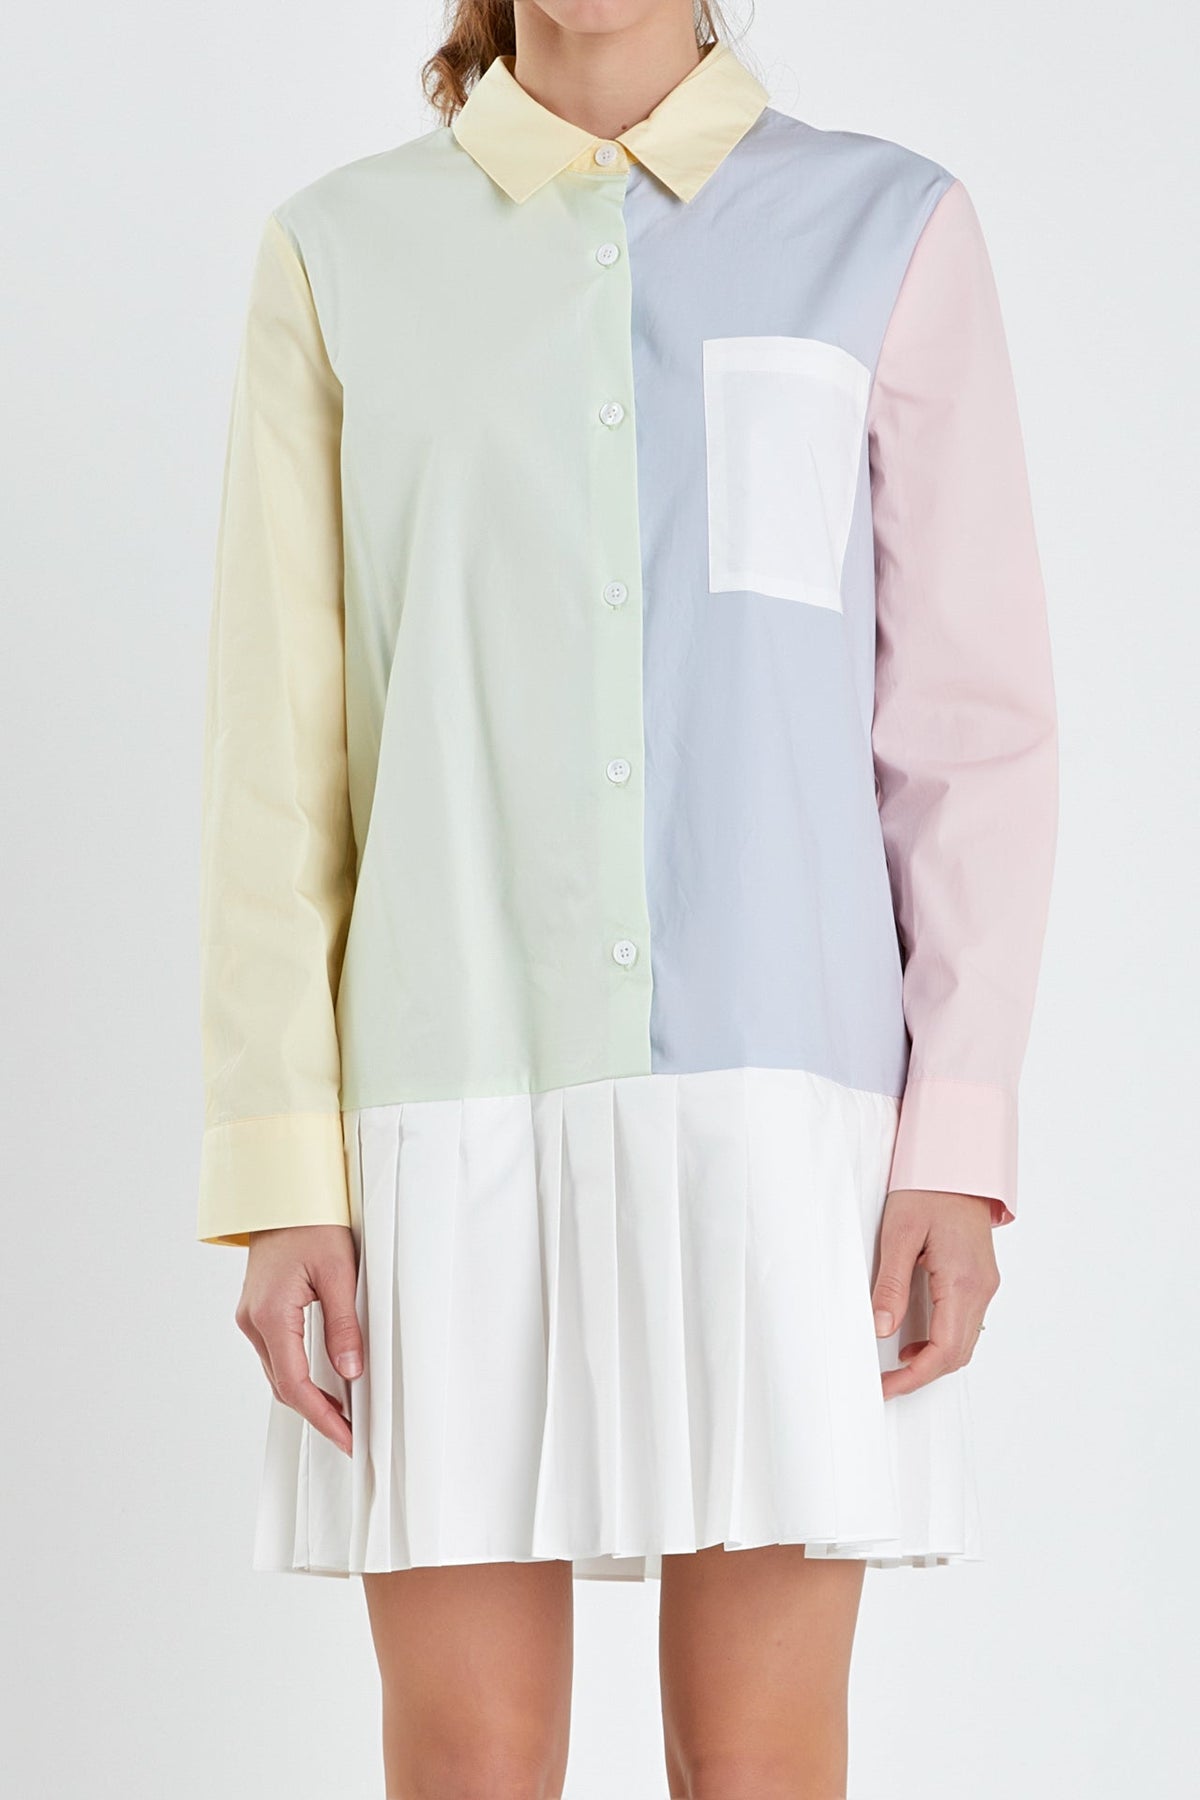 ENGLISH FACTORY - Colorblocked Shirt Dress - DRESSES available at Objectrare